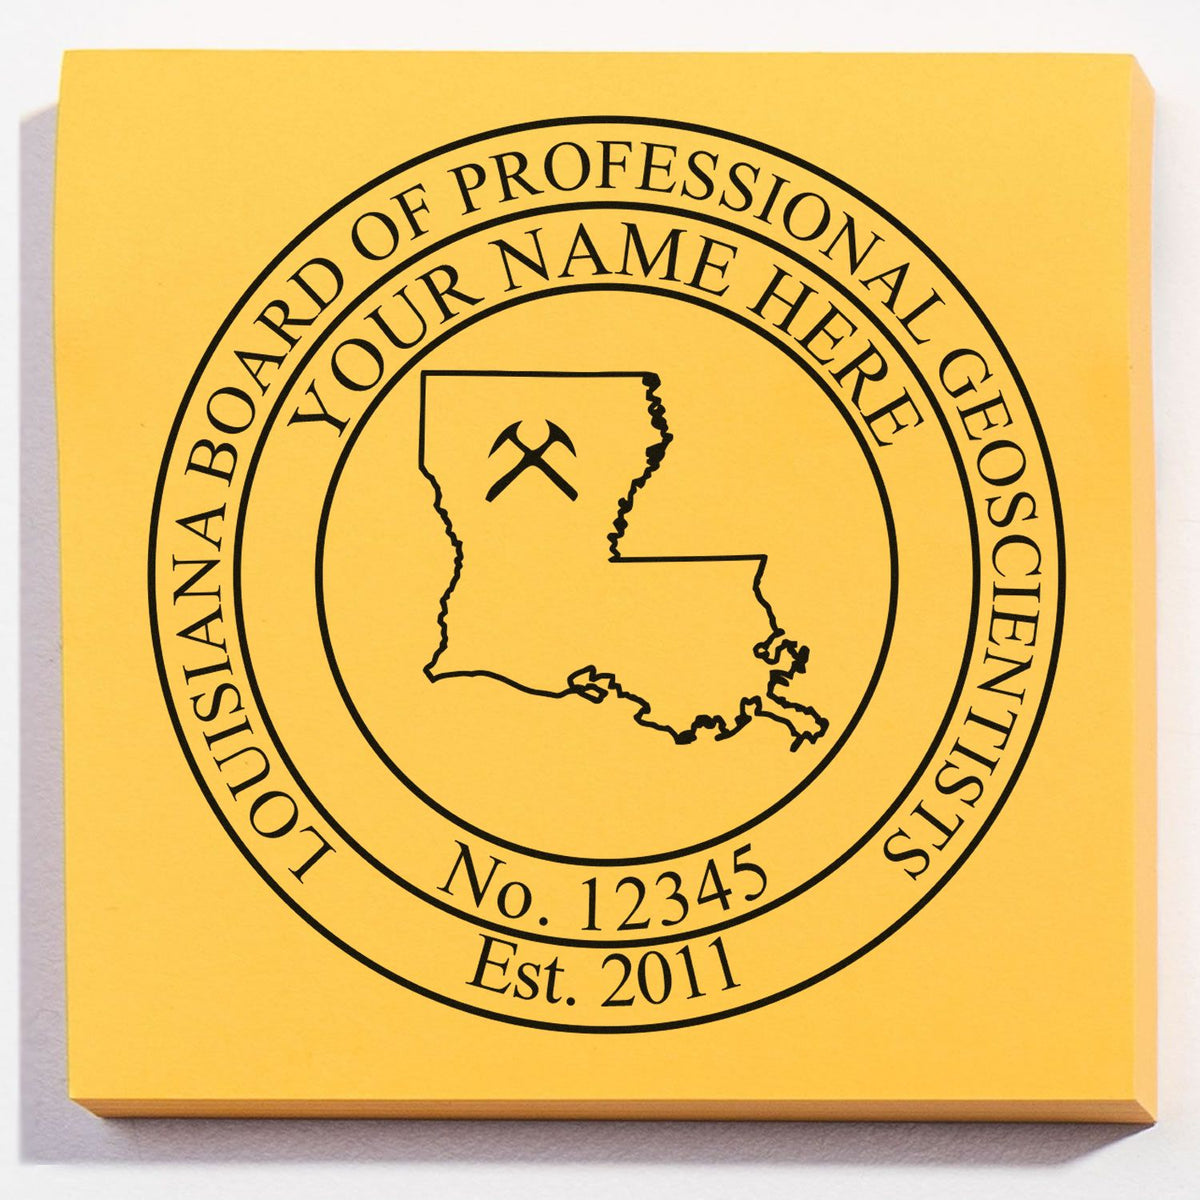 A photograph of the Louisiana Professional Geologist Seal Stamp stamp impression reveals a vivid, professional image of the on paper.